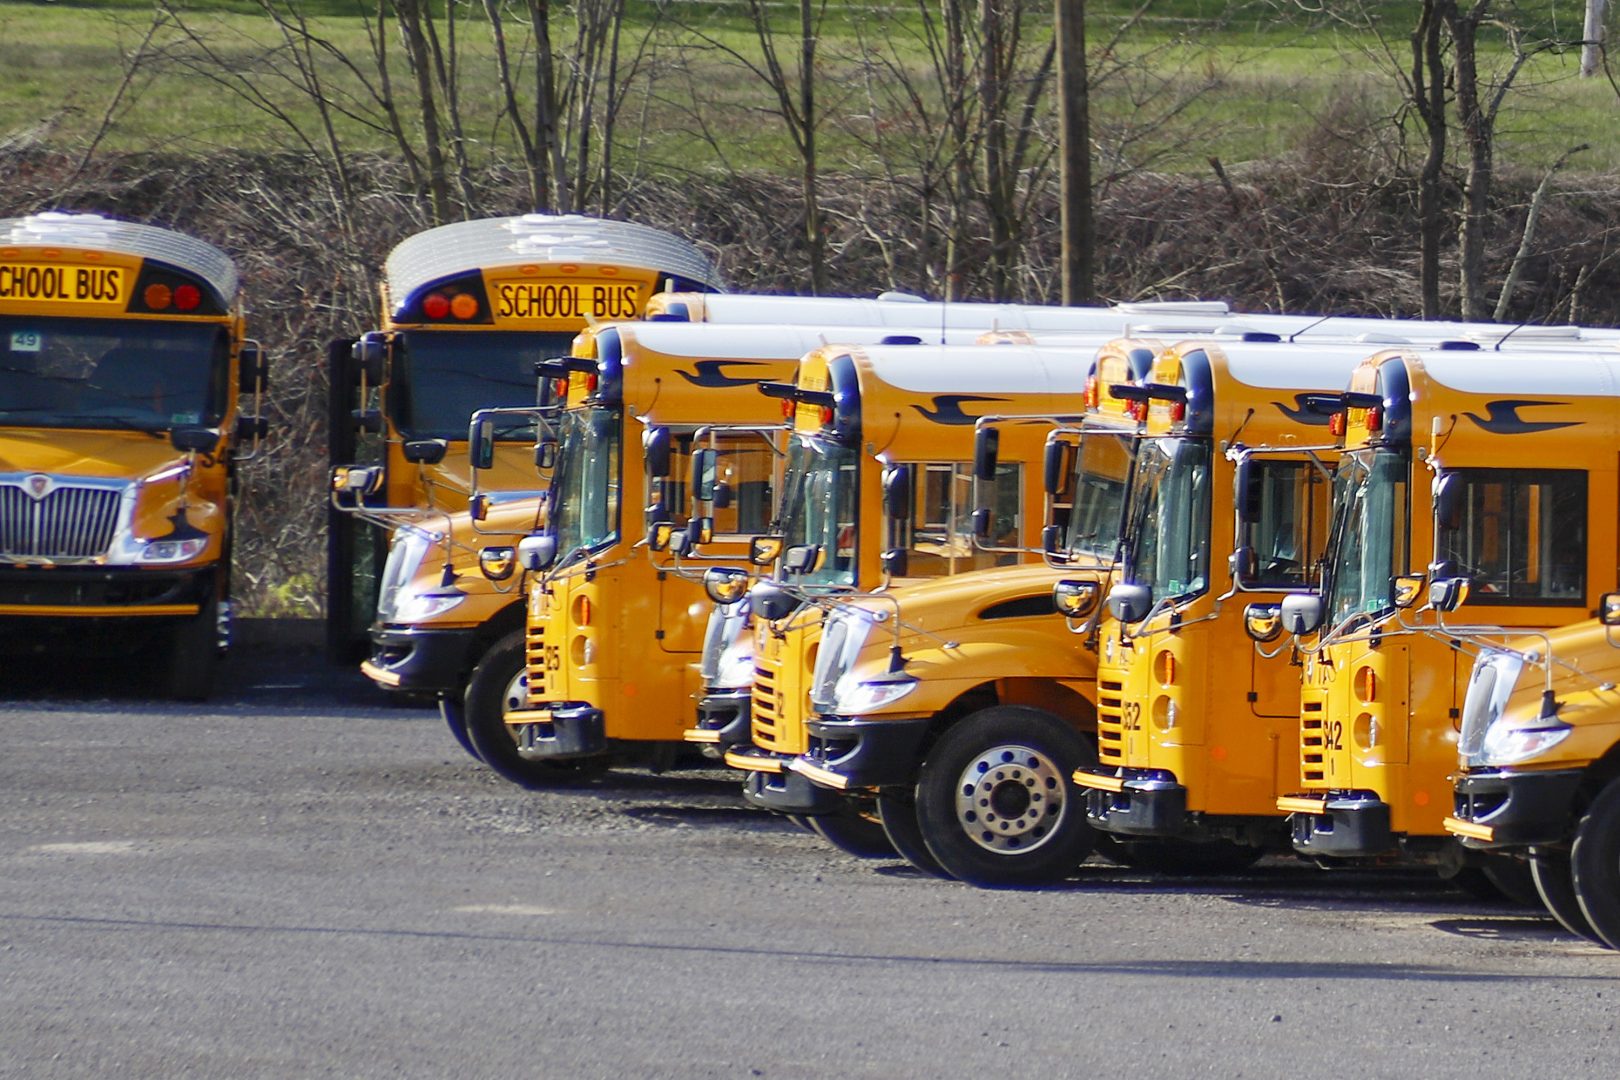 School buses are parked at a depot in Zelienople, Pennsylvania, Thursday, April 9, 2020.